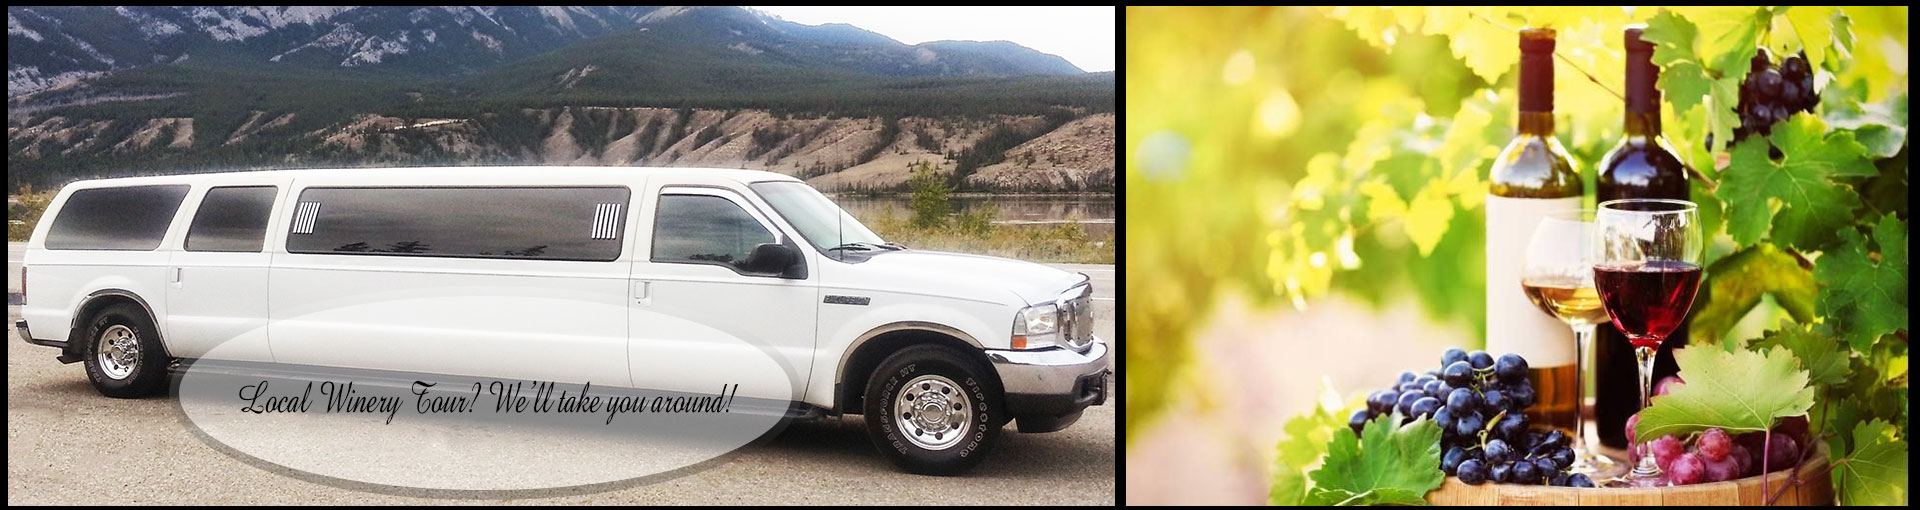 Accent Limousine specializes in wine tours throughout the Okanagan Valley.